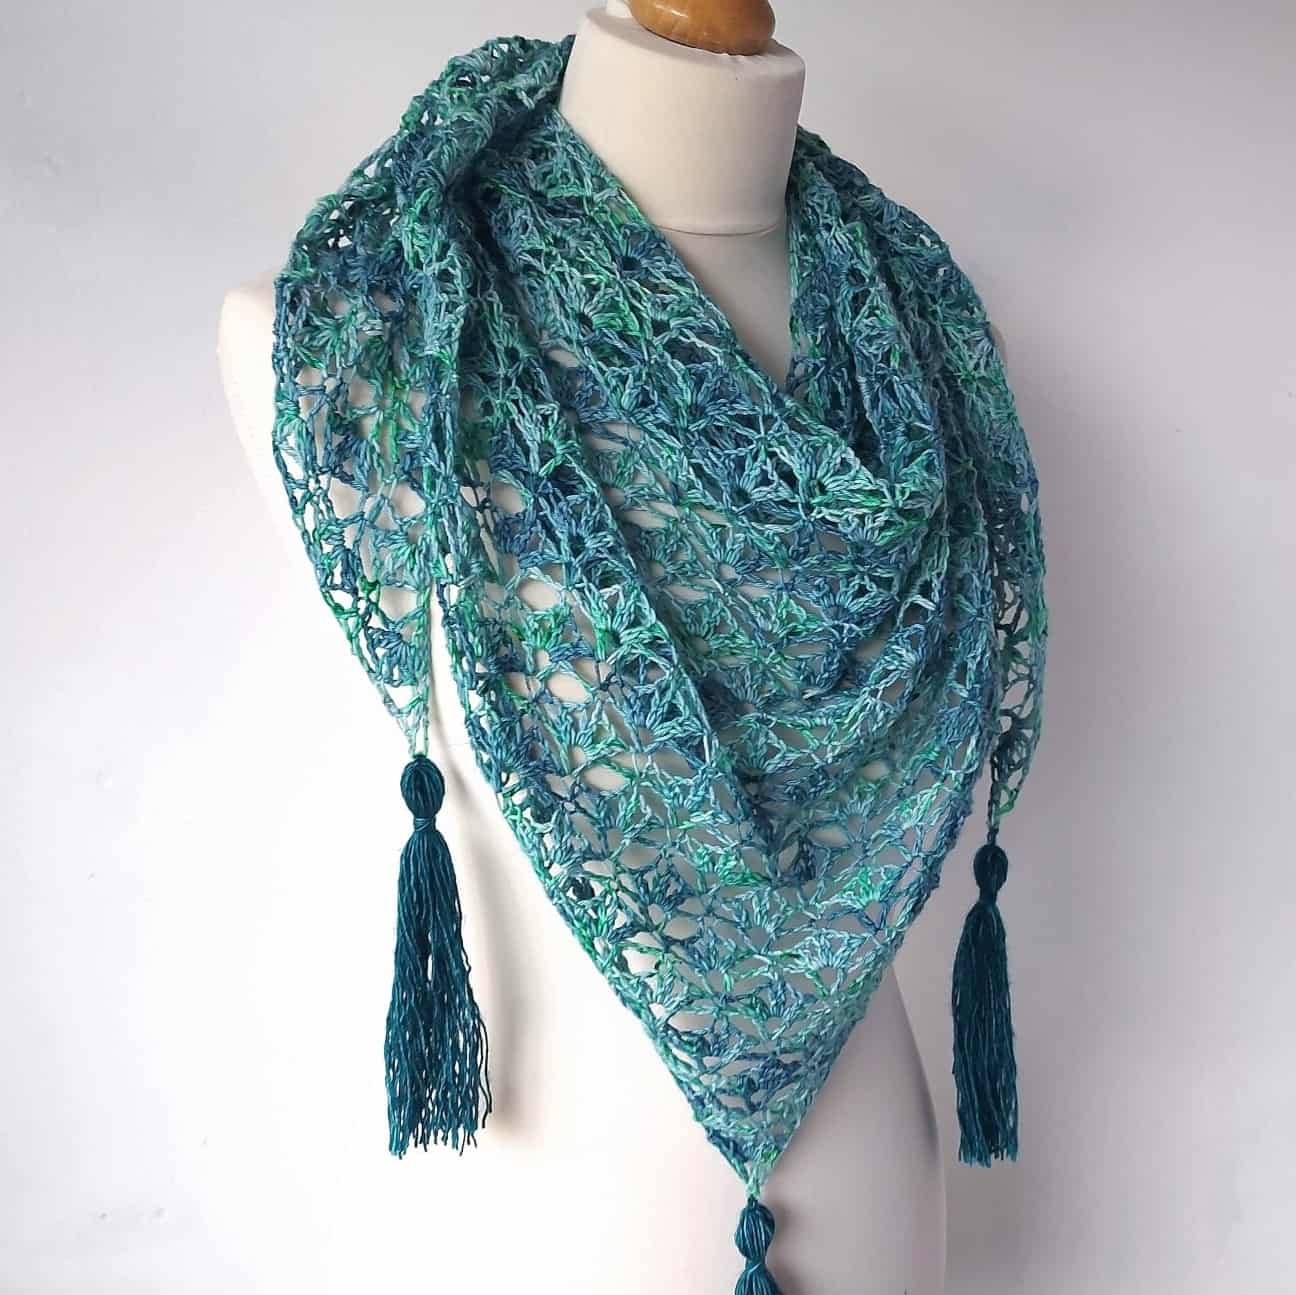 Crochet One Skein Lace Shawl – Winter Ice